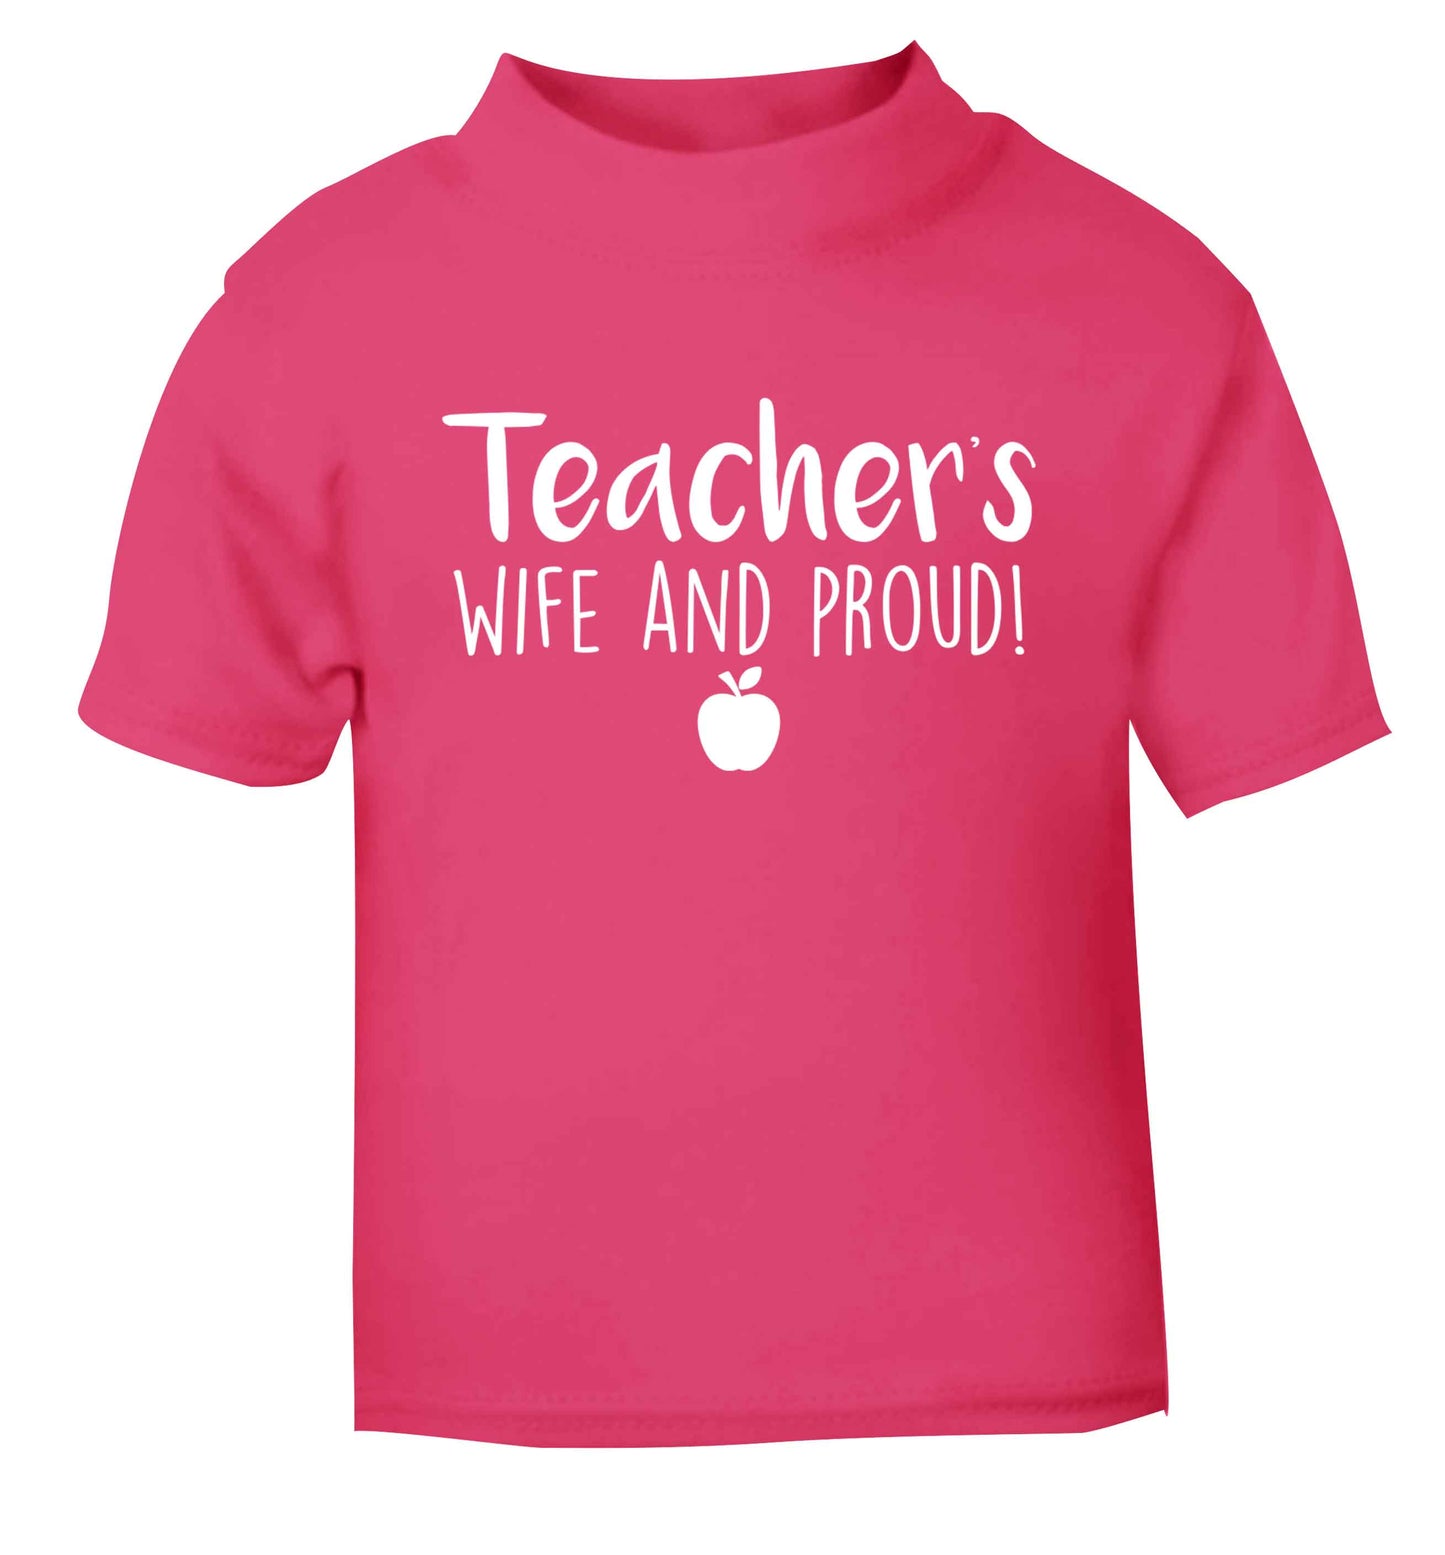 Teachers wife and proud pink baby toddler Tshirt 2 Years